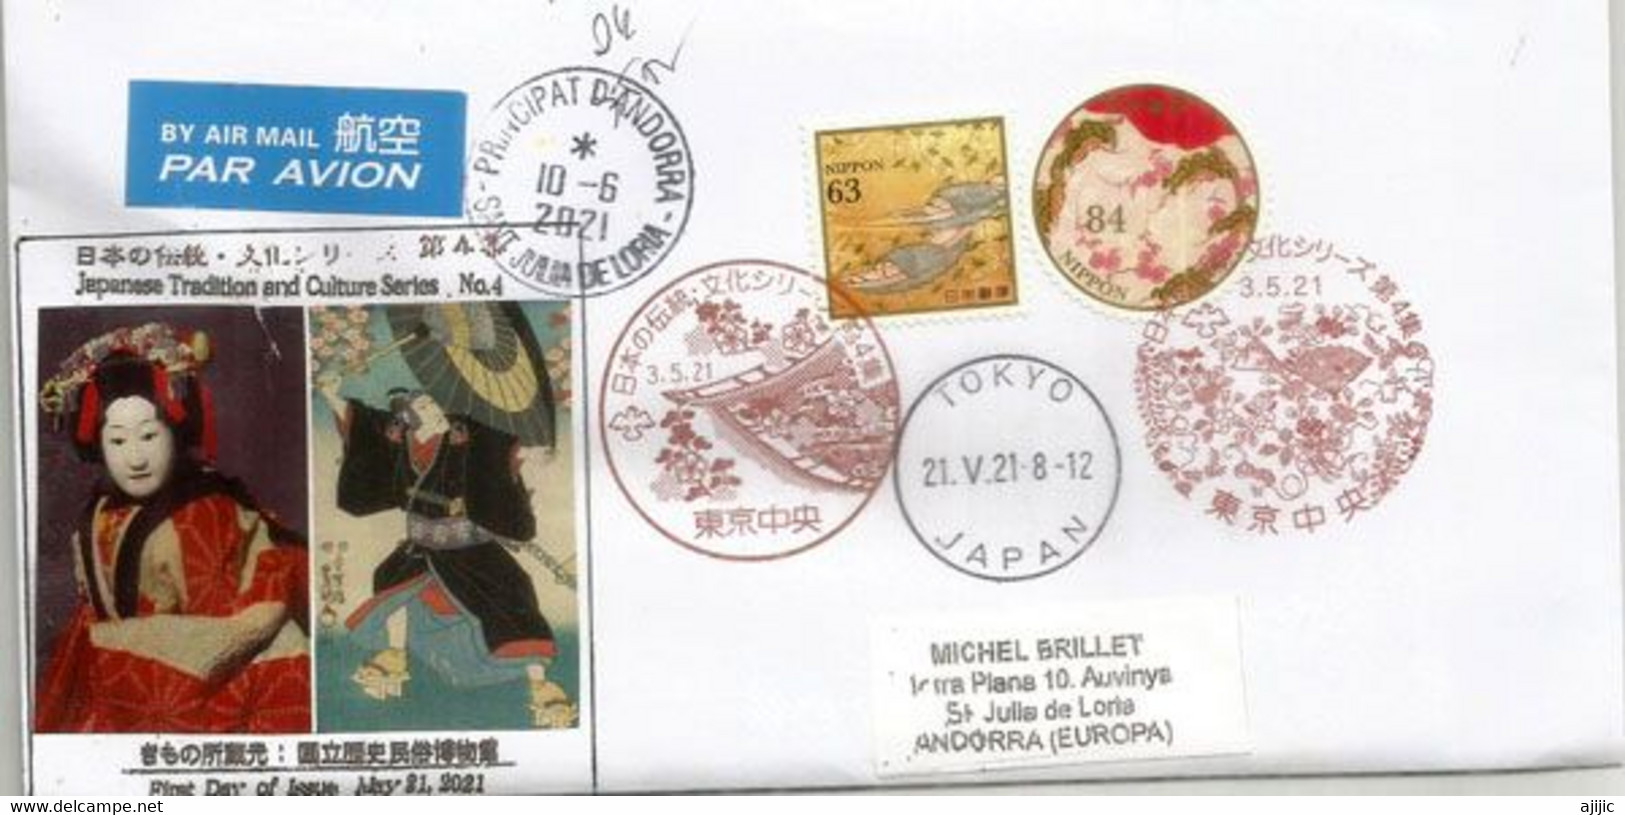 2021 Japan Tradition & Culture Serie, Letter From Tokyo, Sent To Andorra, With Arrival Postmark - Lettres & Documents